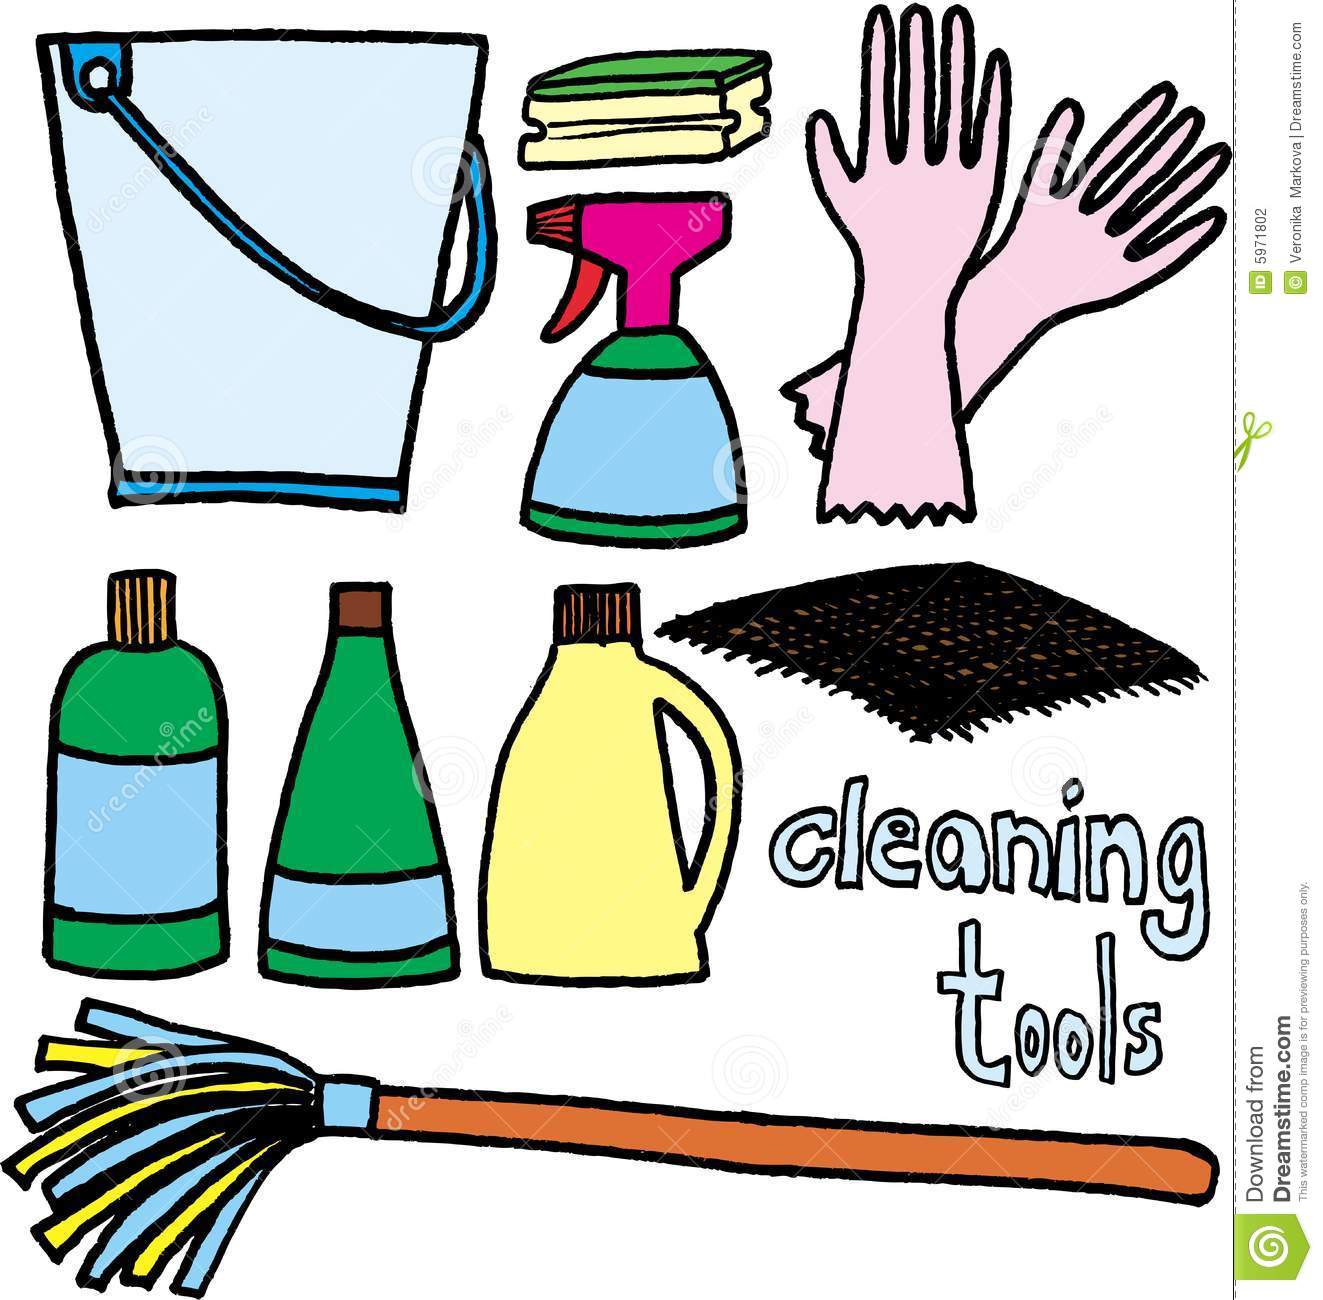 Clip Art Cleaning Tools Clipart.